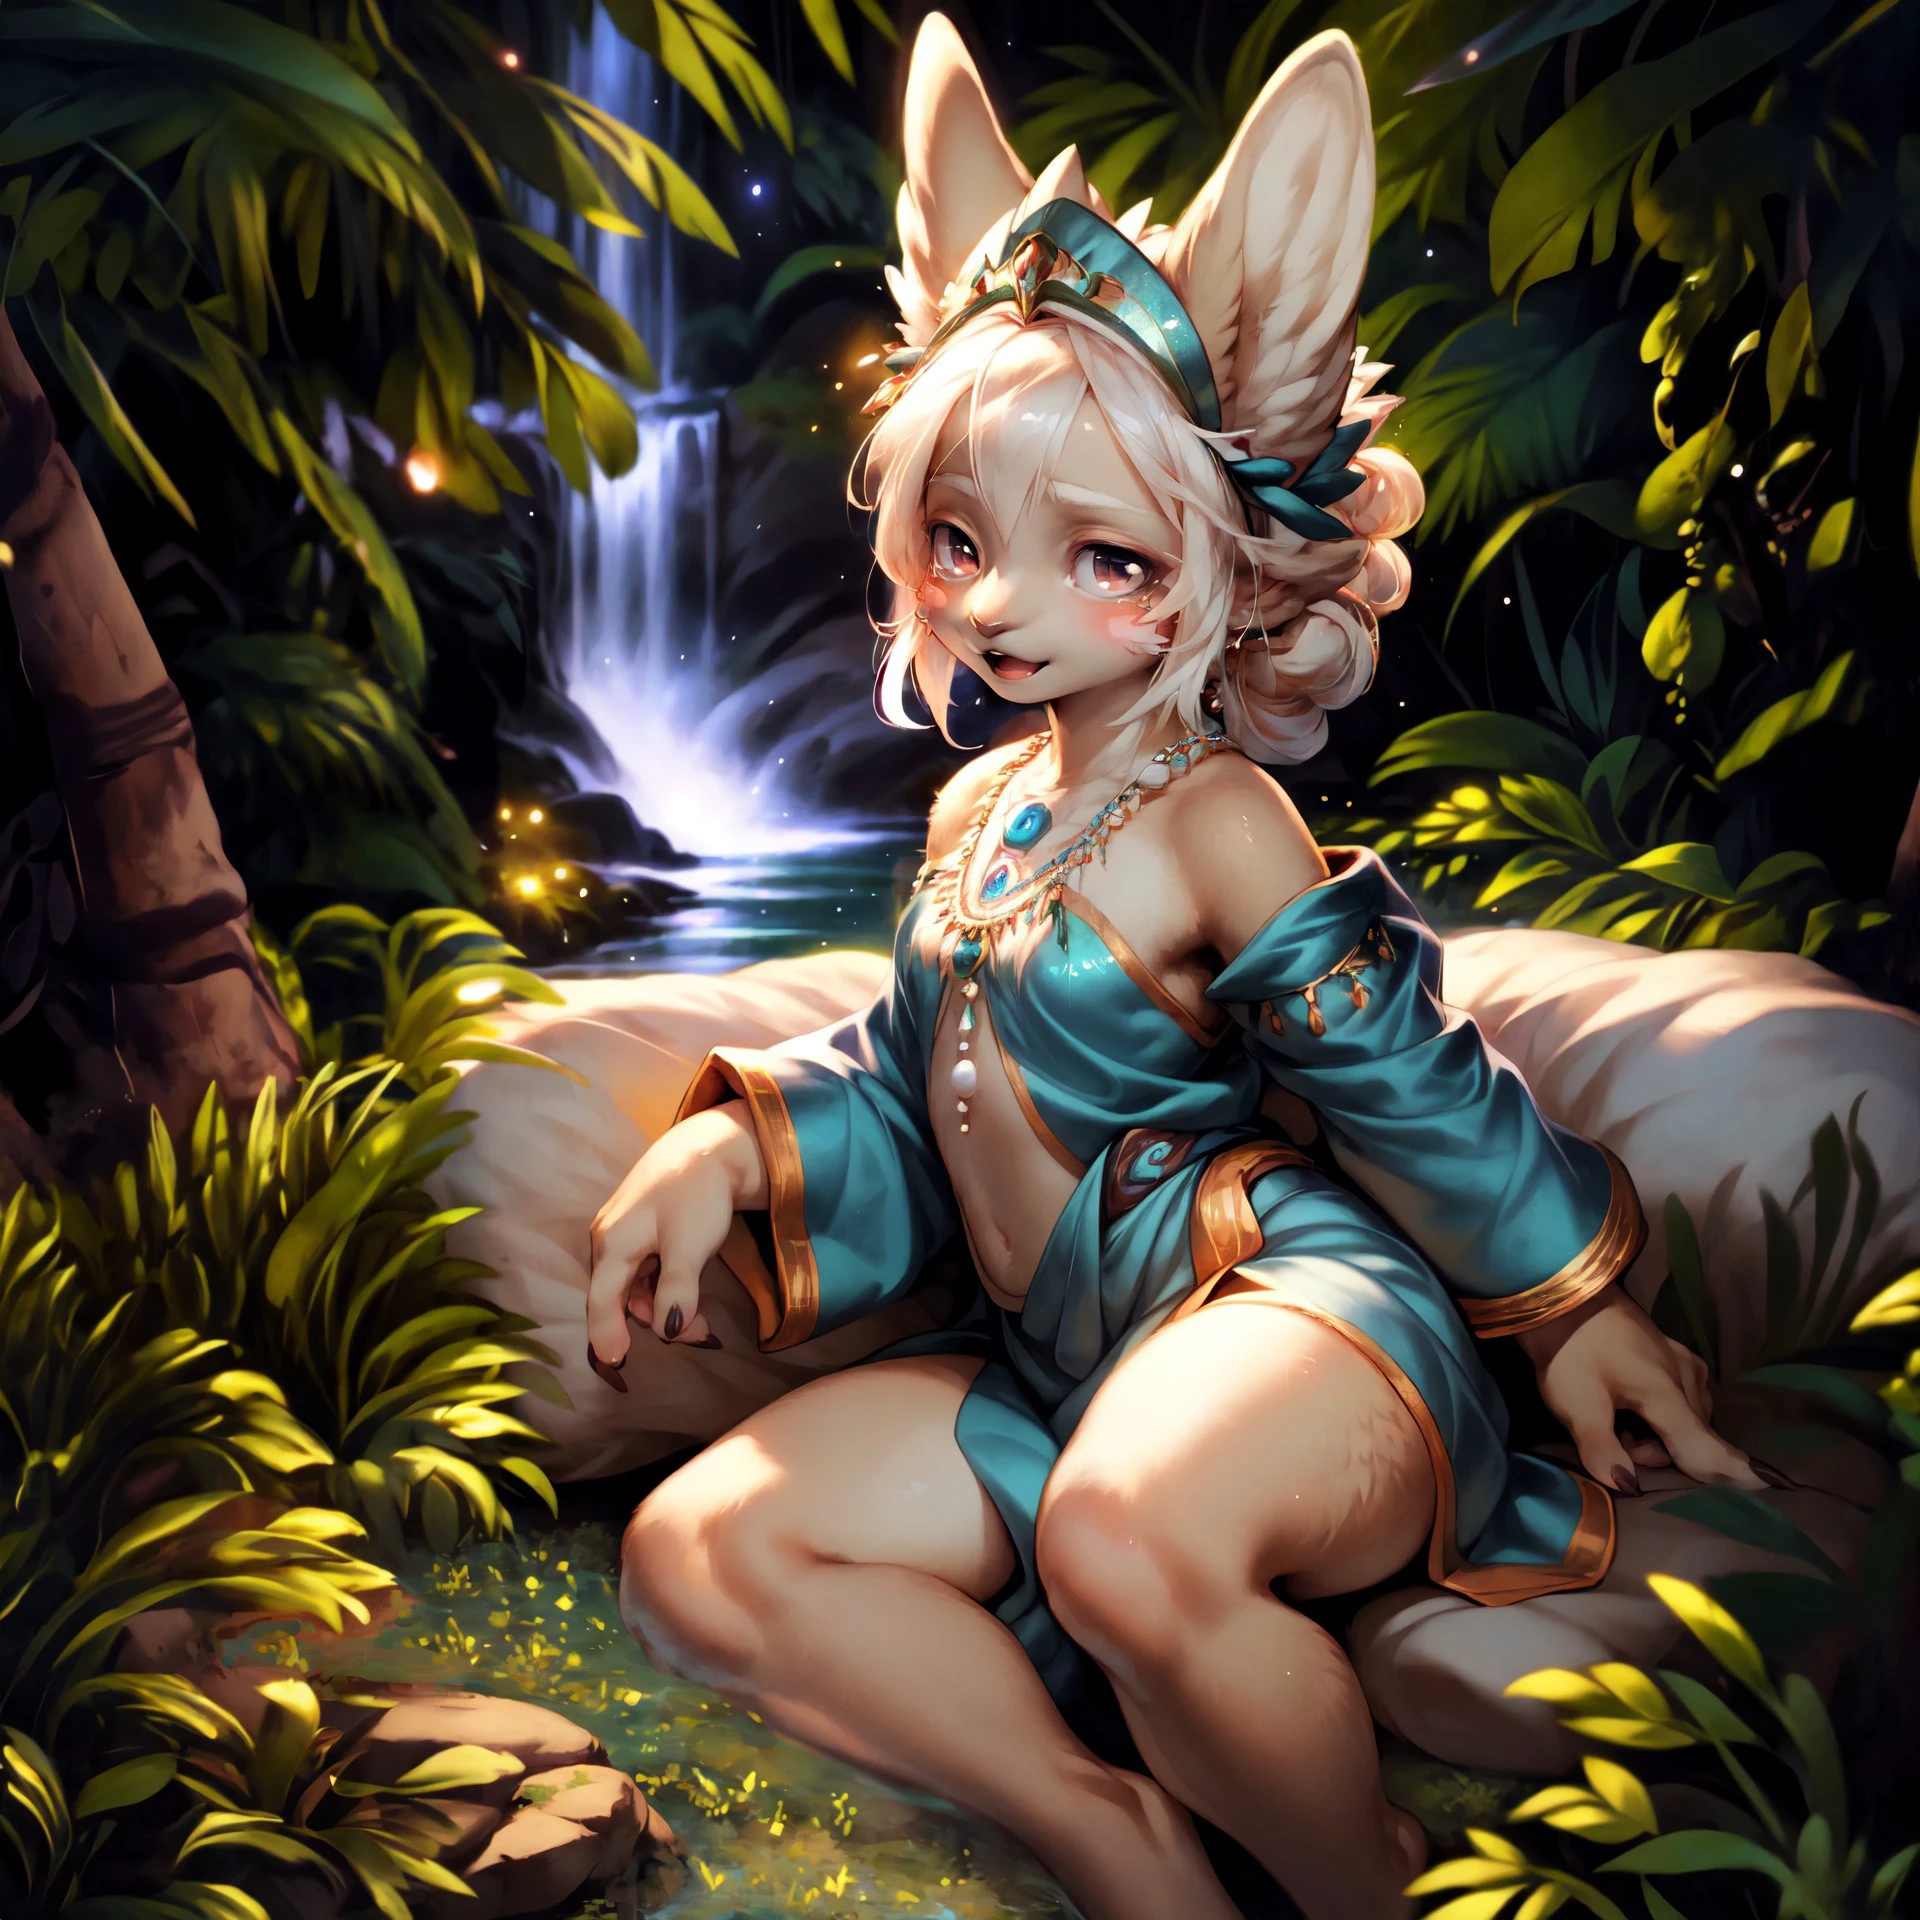 (wildlife photography), masterpiece, ultra realistic,
(three quarter back) view, backside, over the shoulder, hero view,
(furry) (anthro) female,  [rabbit|goat], mineru, zonai, facial markings, eyeshadow, white hair, clothed,
bunny, nanachi \(made in abyss\),
detailed and extremely fluffy body fur, blushing, (chibi), glossy fur, young adult, thick thighs, cute, young,
open mouth, happy, mischievous,
ponytail,
reclining on a couch, (spread legs:0.5),
intricate jewelry,
(Ocean Sorceress Robes, Flowing aqua-blue robes adorned with seashell starfish crown and pearl-embellished tiara), (midriff:0.5),
uploaded on e621, by Anixaila, by Youjomodoki, by Demicoeur, by castitas, by darkgem, (by dagasi:0.5), (by Artur Bordalo:0.5),
furrycore,
harem outfit, dancer, dancing, see-through,
[[mlpapplejack, ponytail, ]],
twilight, evening
Whispering Waterfalls, Cascading waters from towering cliffs, misty rainbows in the spray, hidden grottos behind the falls with glowing crystals,
Vibrant coral reefs visible beneath the surface of the shallow water,
Lunar Nightshade Gardens, Gardens filled with nocturnal luminescent flora that bloom under the moonlight,
detailed, realistic, 8k uhd, high quality, high quality photography, 3 point lighting, flash with softbox, 4k, Canon EOS R3, hdr, smooth, sharp focus, high resolution, award winning photo, 80mm, f2.8, bokeh,
cinematic composition, cinematic lighting,highly detailed, masterpiece, best quality, realistic, (intricate:0.9), (high detail:1.4), film photography, sharp focus,